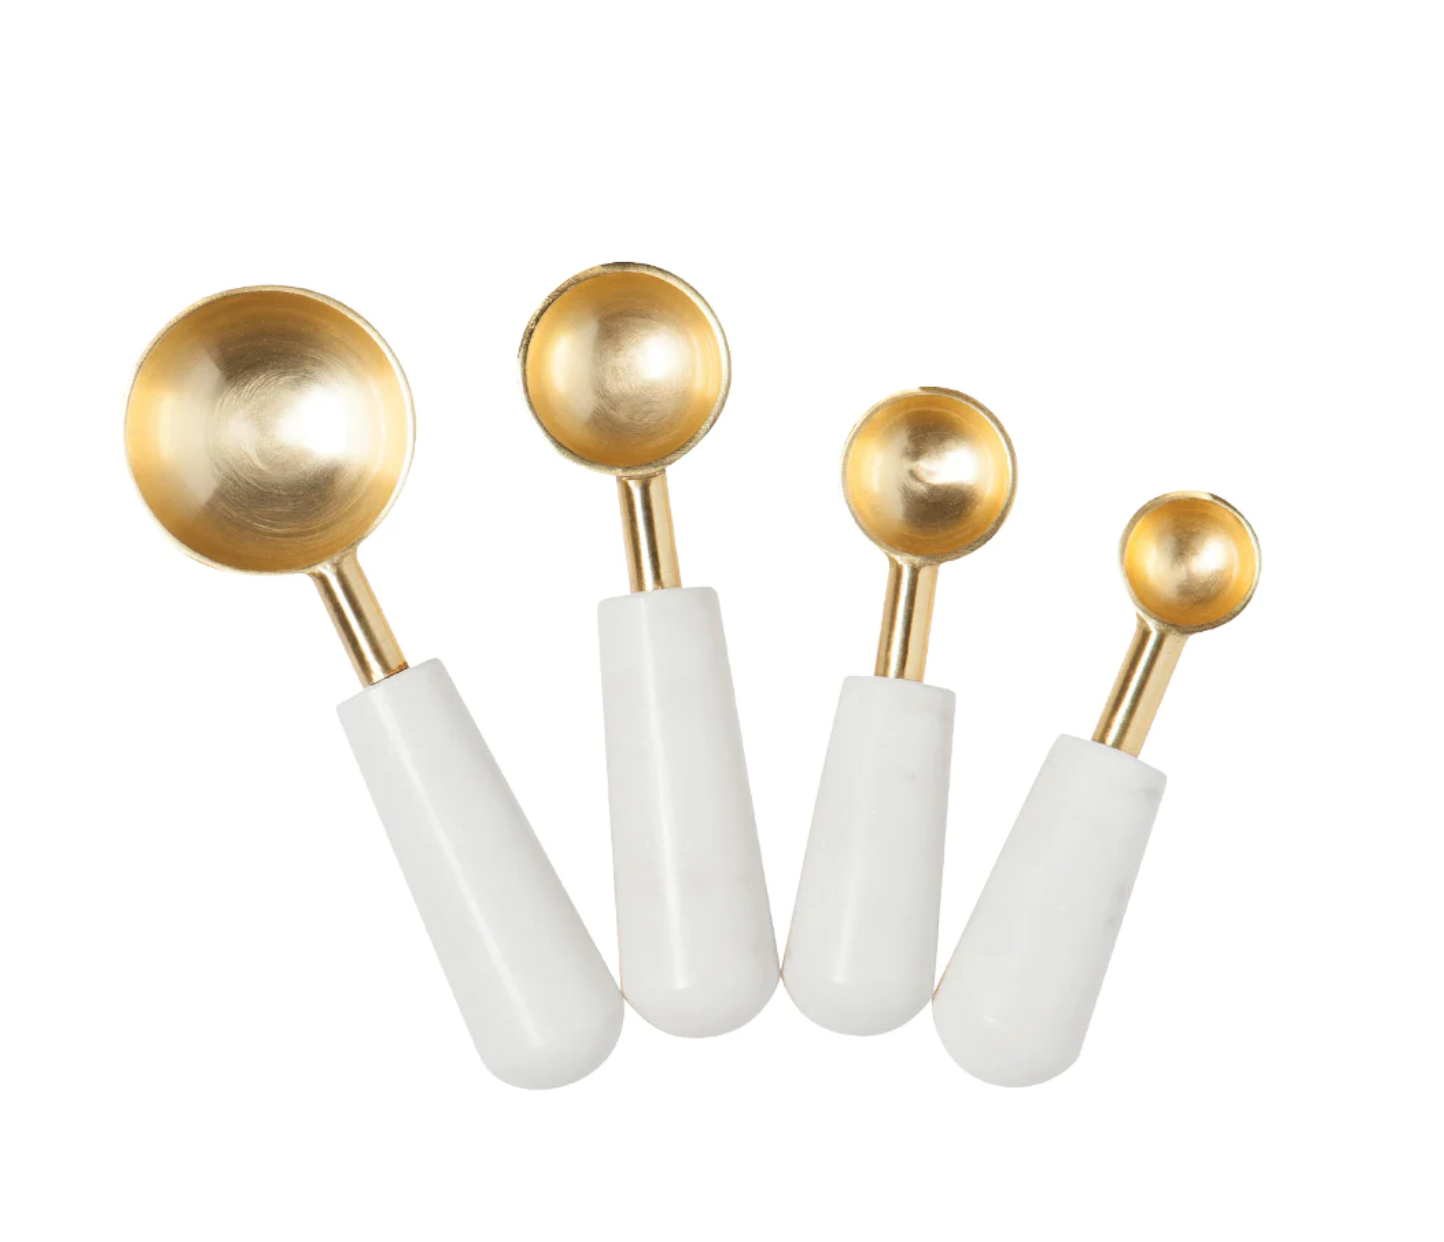 Measuring Spoon - Gold/Marble